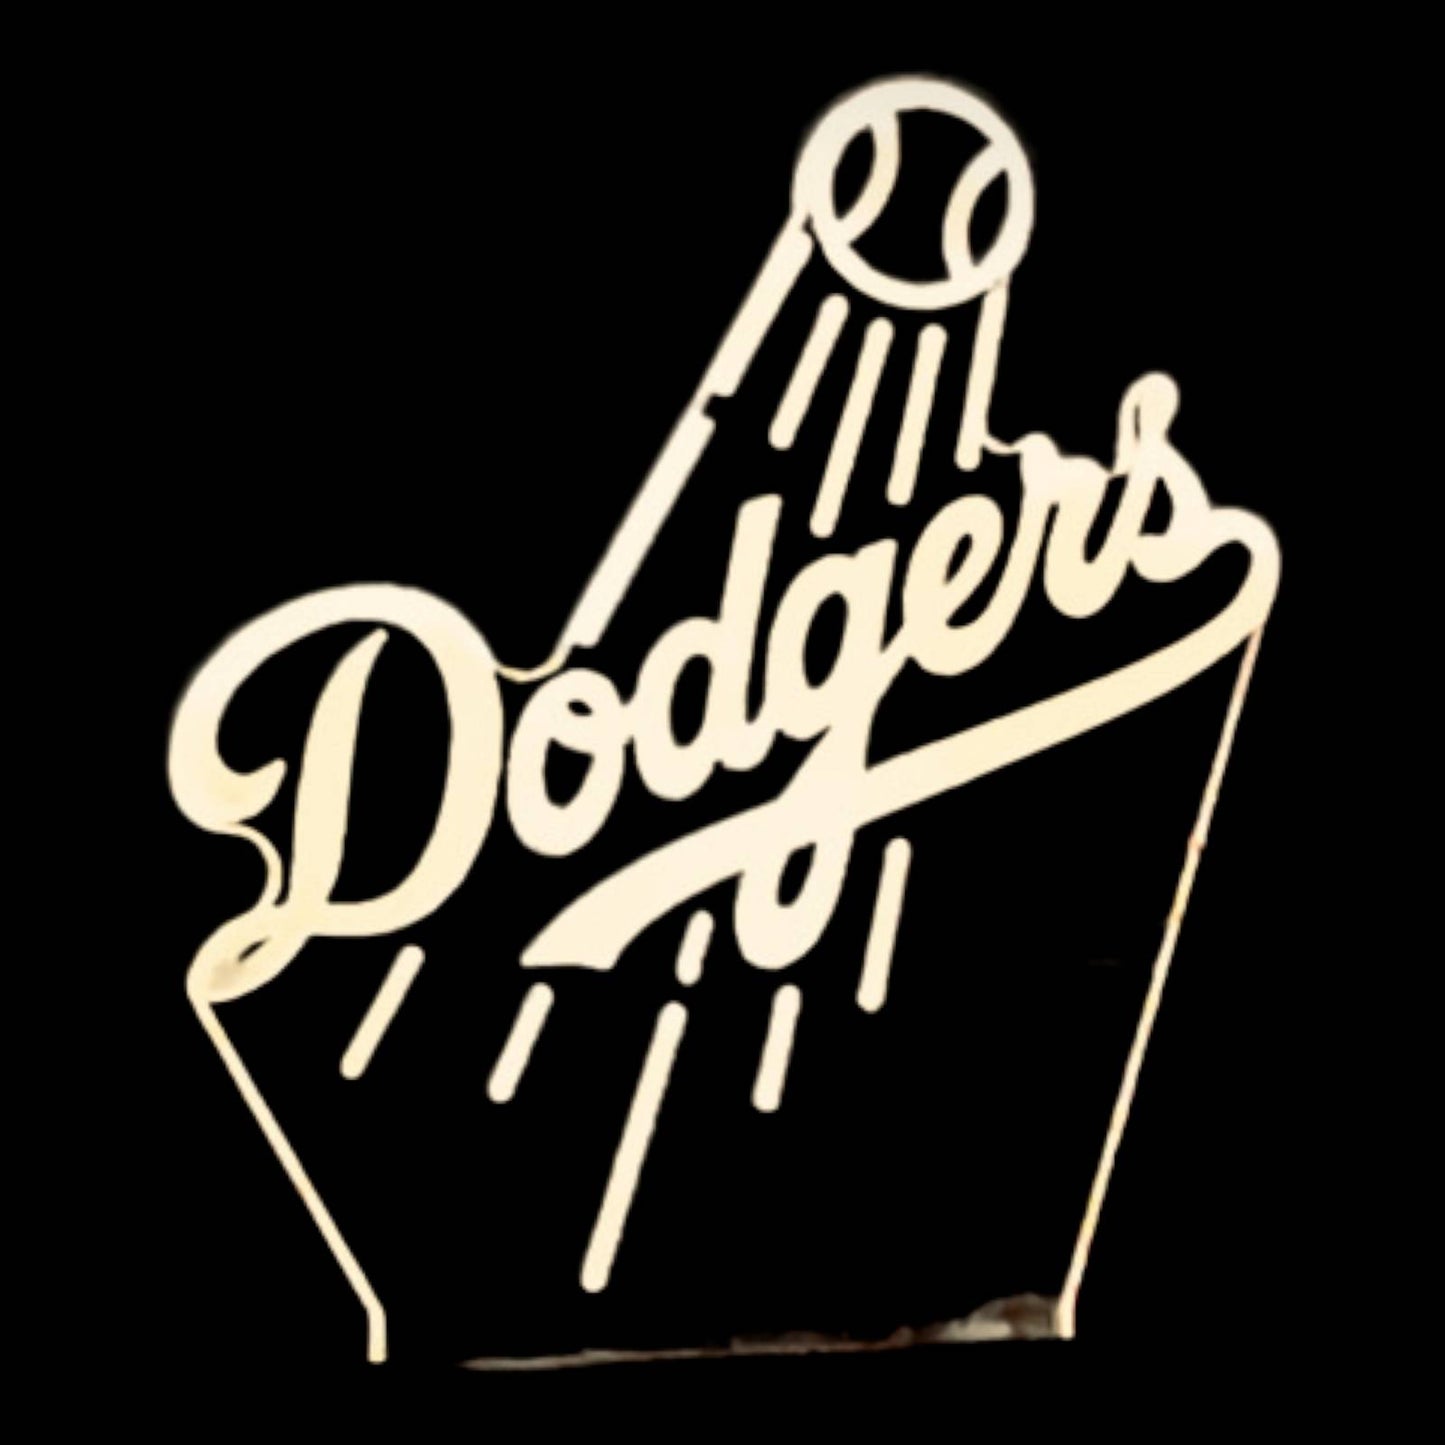 Los Angeles Dodgers 3D LED Night-Light 7 Color Changing Lamp w/ Touch Switch